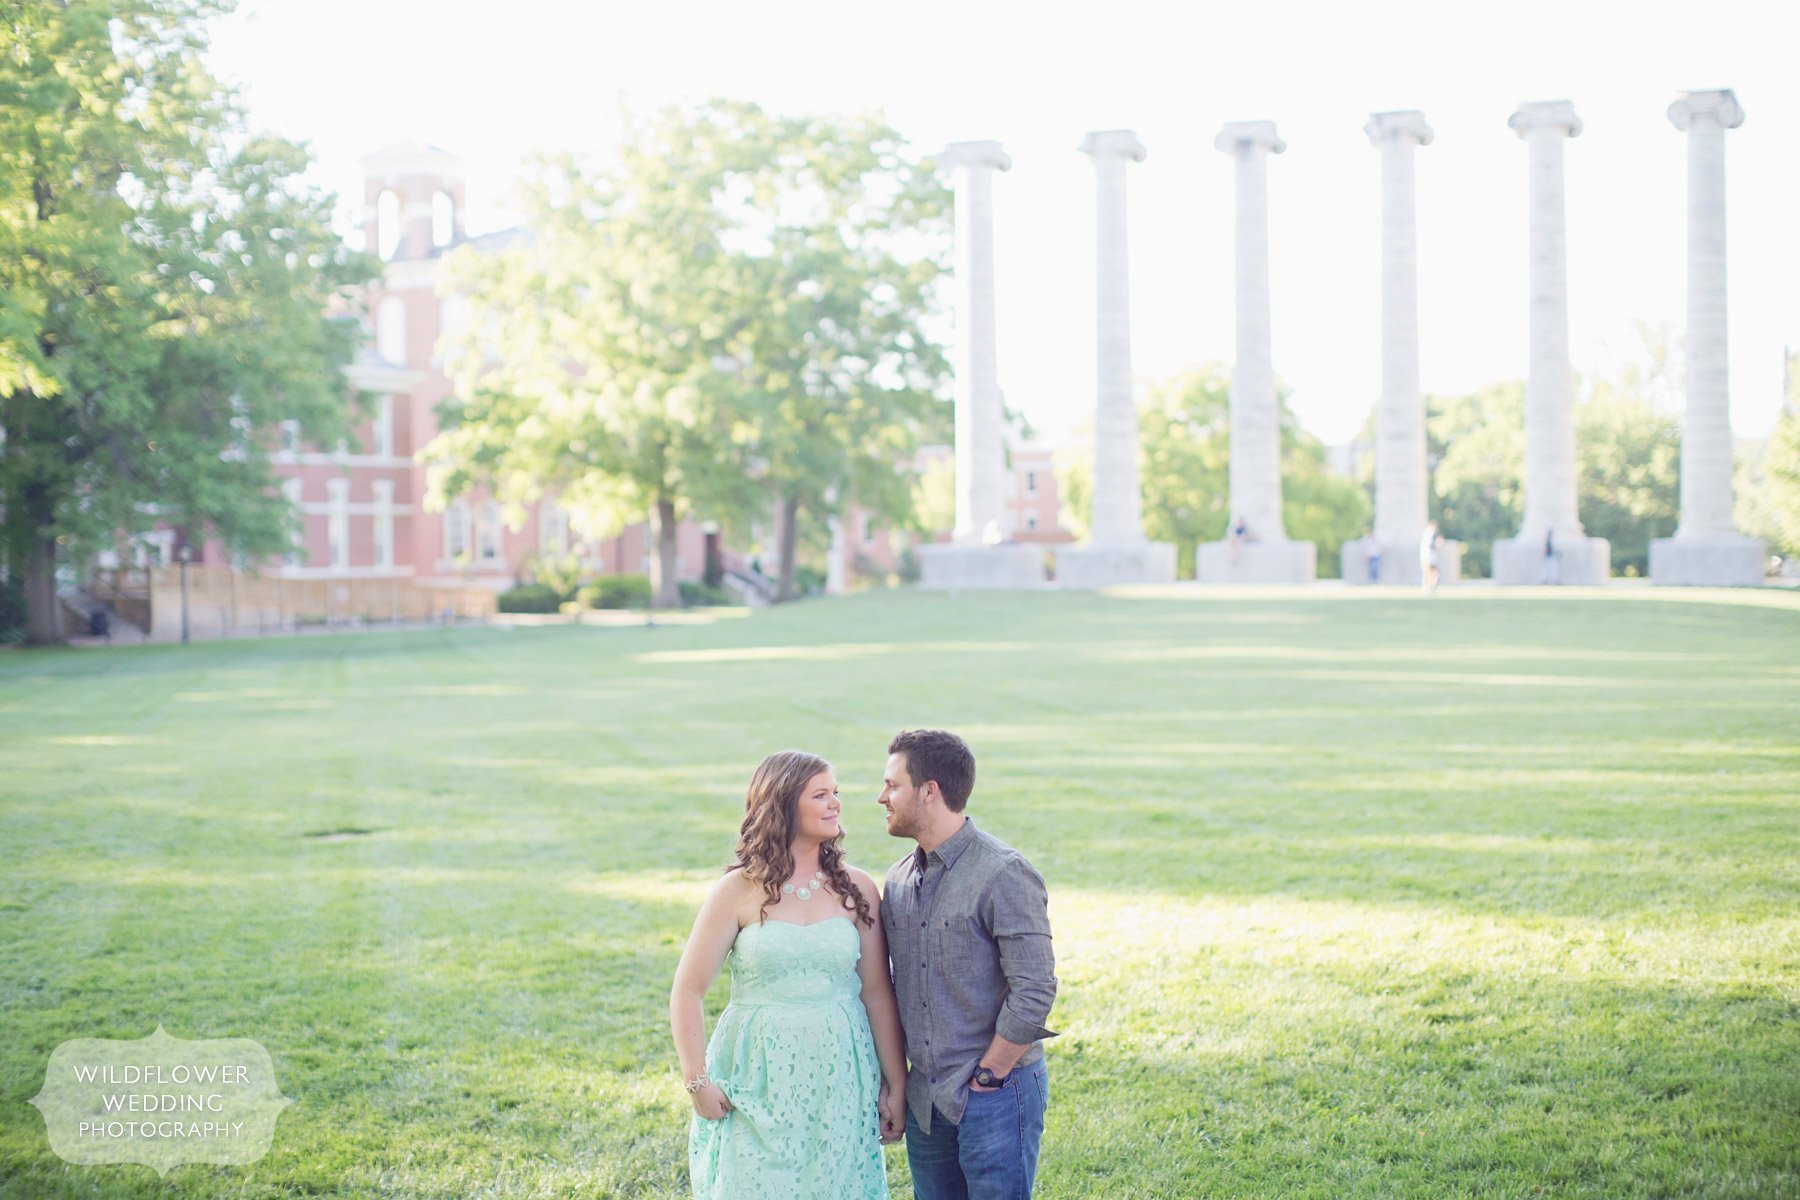 Photo of an engaged couple in front of the historic columns on the quadrangle of Mizzou campus in Columbia, MO.